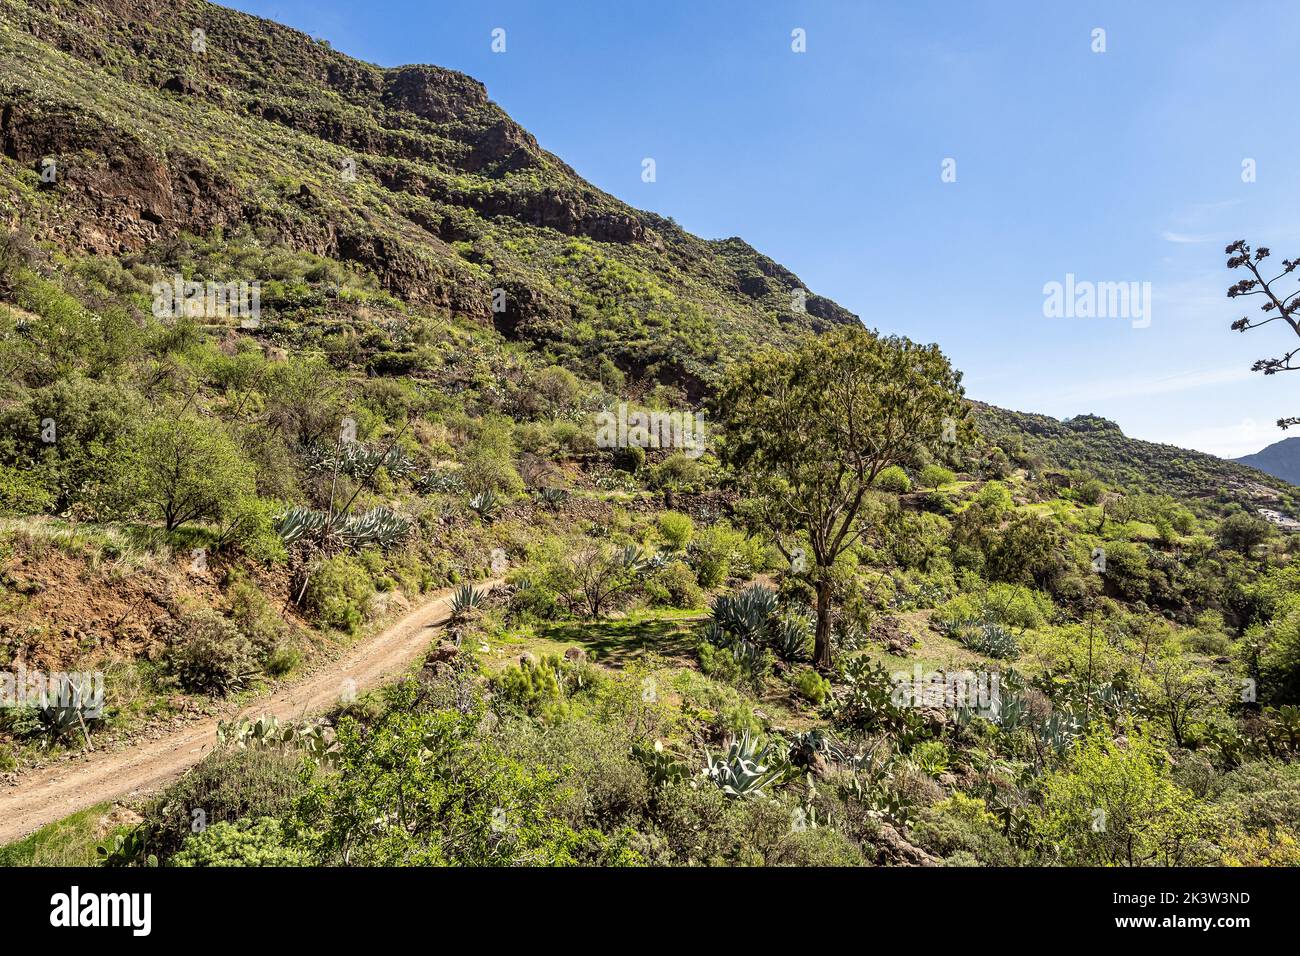 Hiking from Barranco de Guayadeque to Caldera de los Marteles, a volcanic area with dry fields at the bottom, Gran Canaria, Canary Island, Spain, Euro Stock Photo